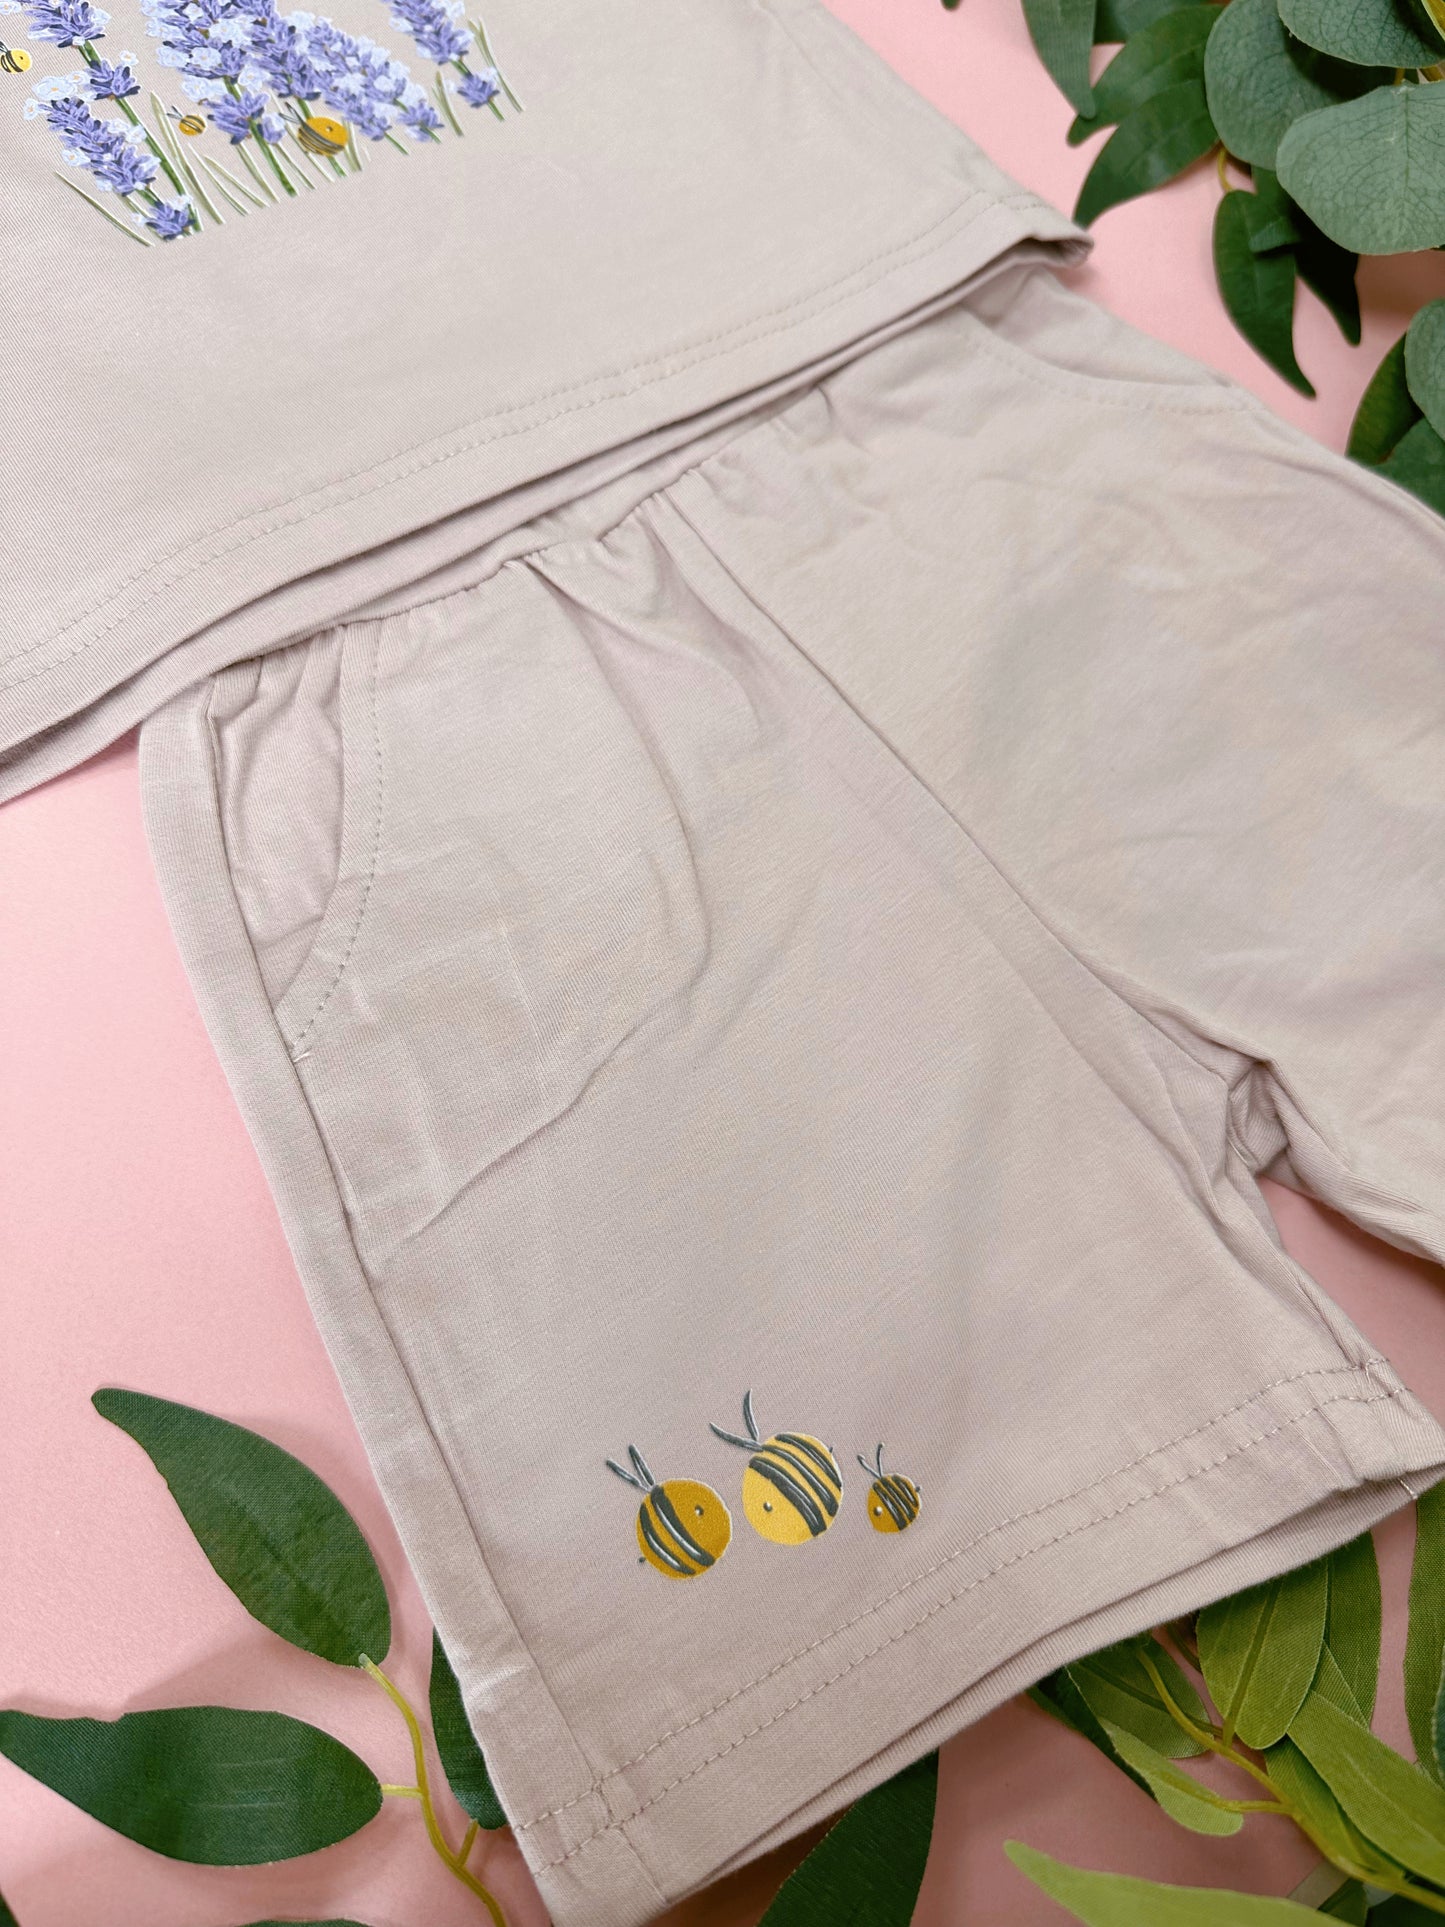 Lavender Bee Short and Tee Set